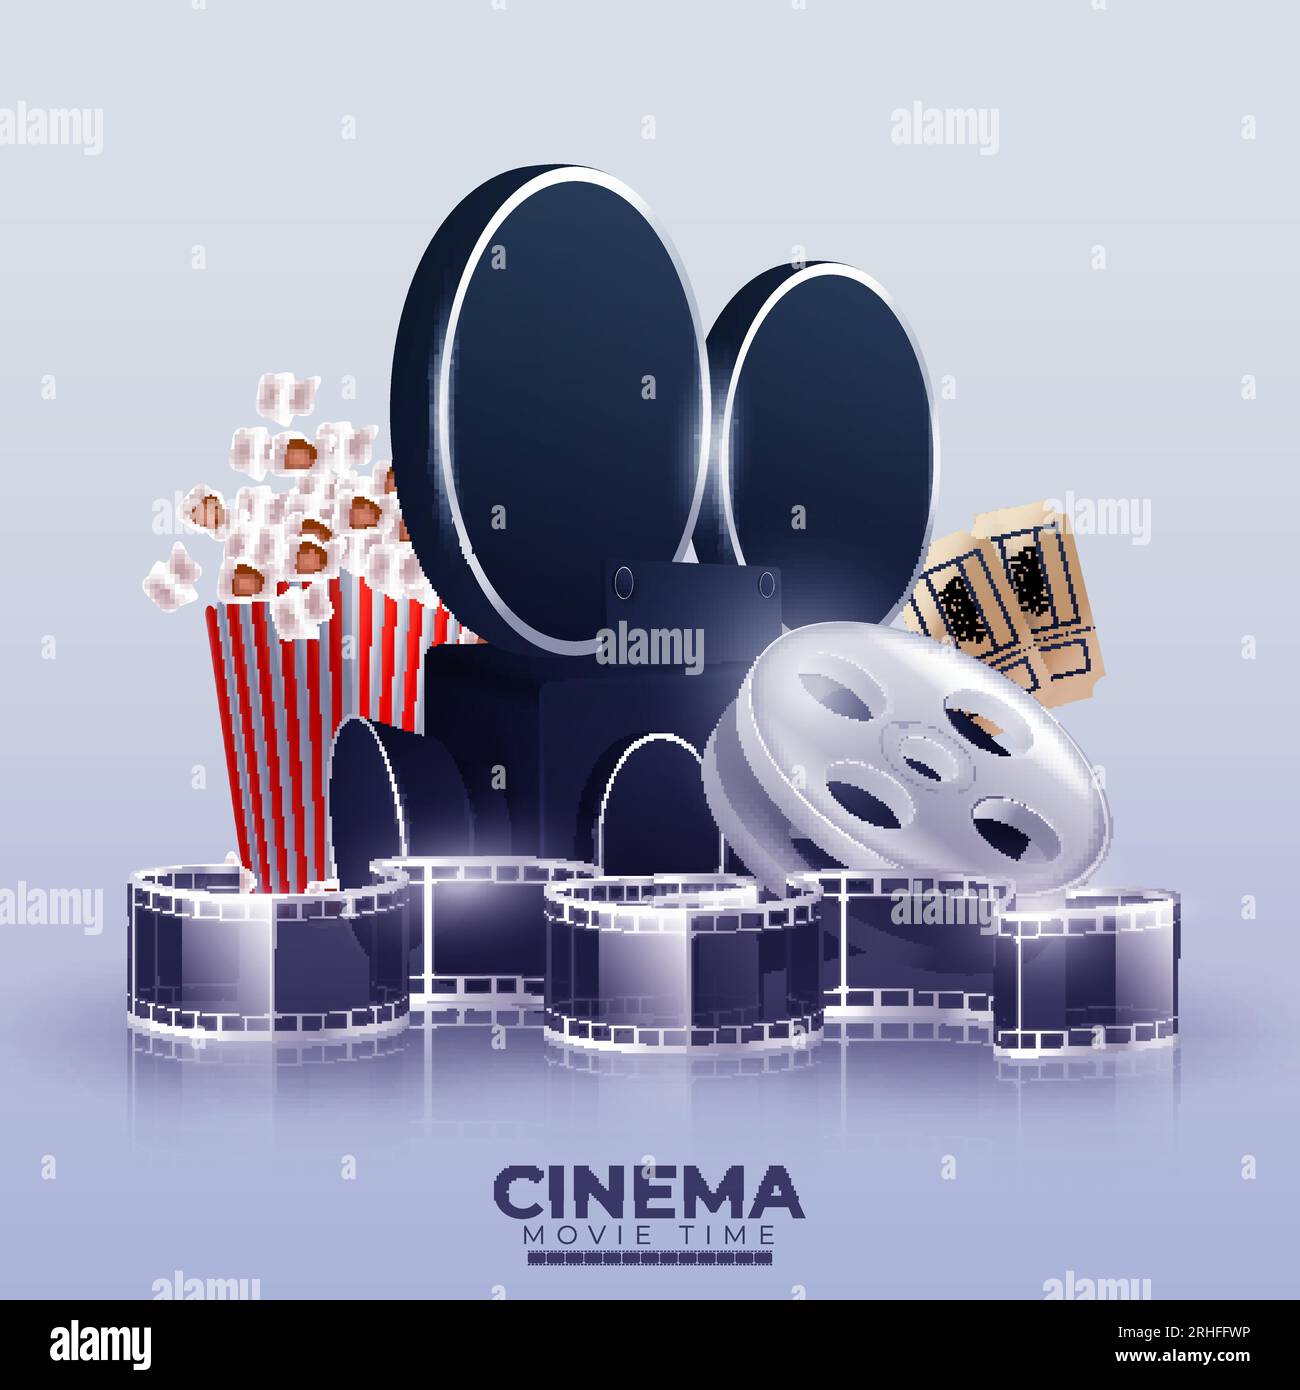 Movie film reels are seen in this 3-D illustration about the cinema